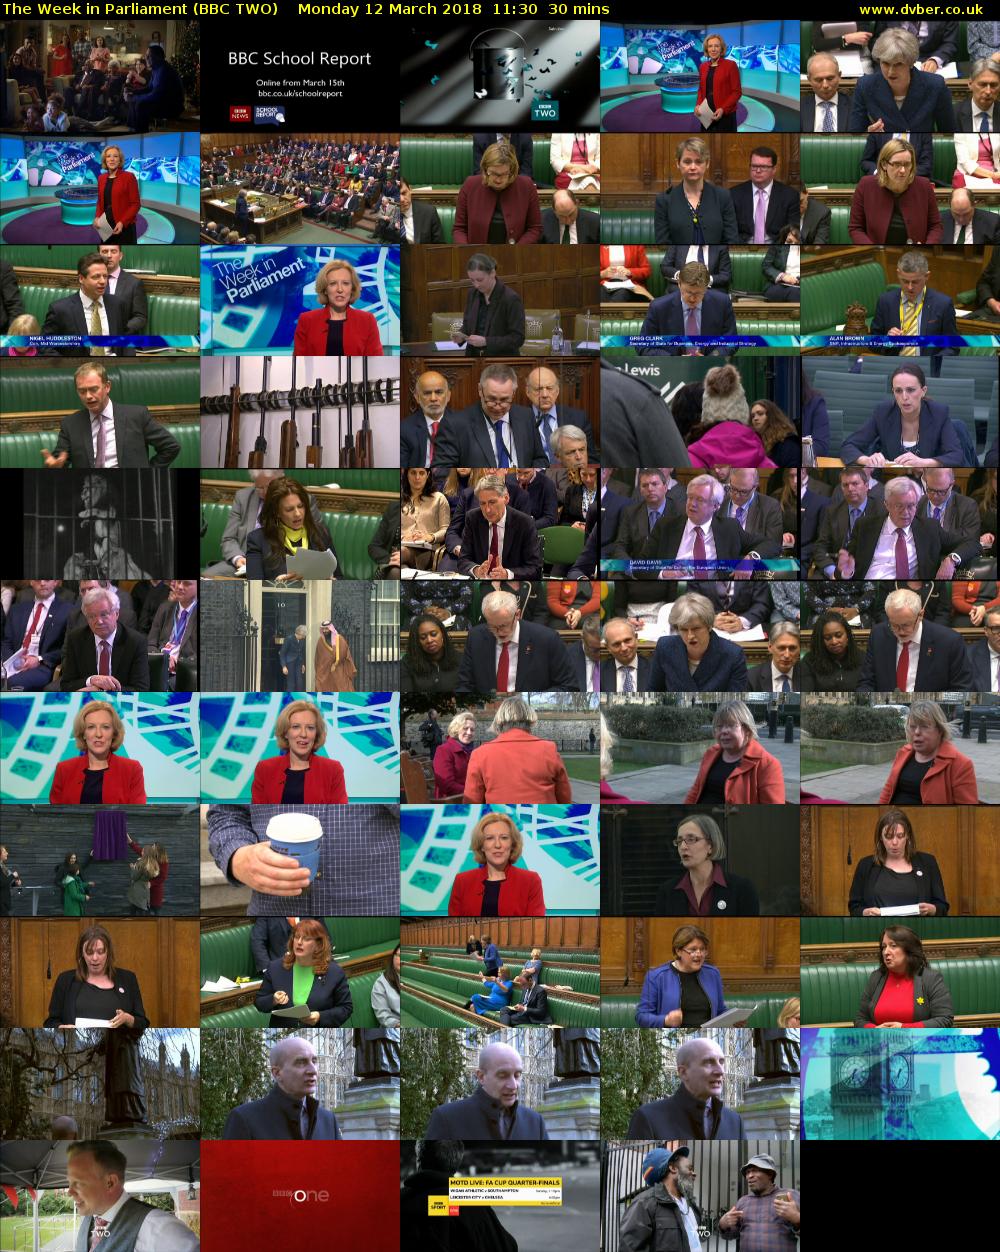 The Week in Parliament (BBC TWO) Monday 12 March 2018 11:30 - 12:00